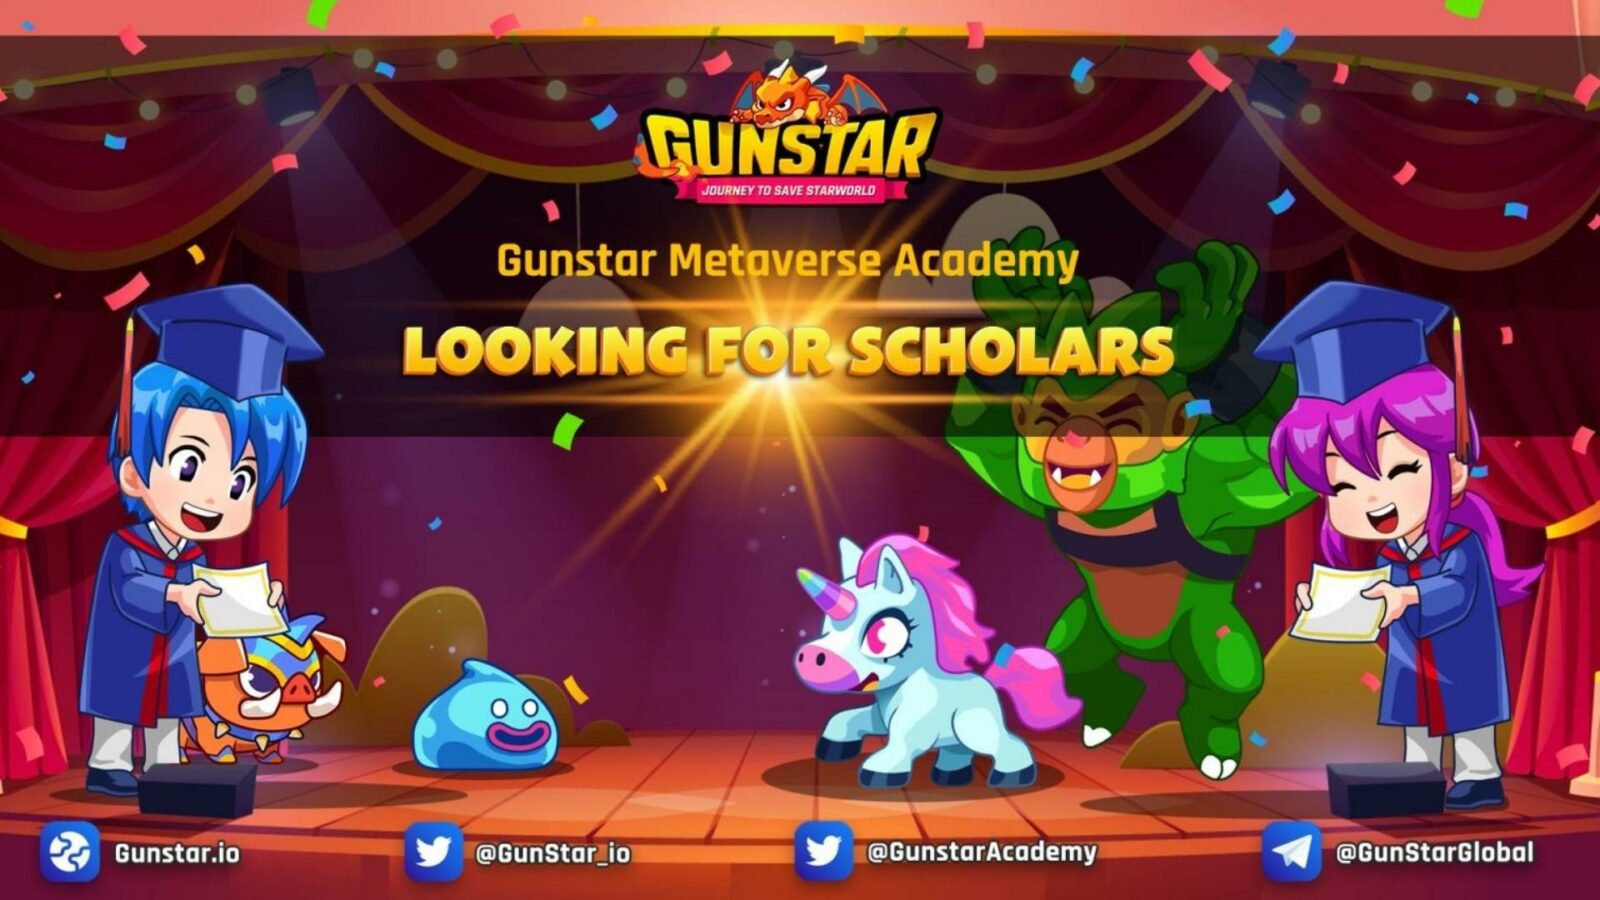 Gunstar, a P2E turn-based strategy game, has opened 50 scholarship slots to onboard new players and maximize fun and entertainment in a free way!